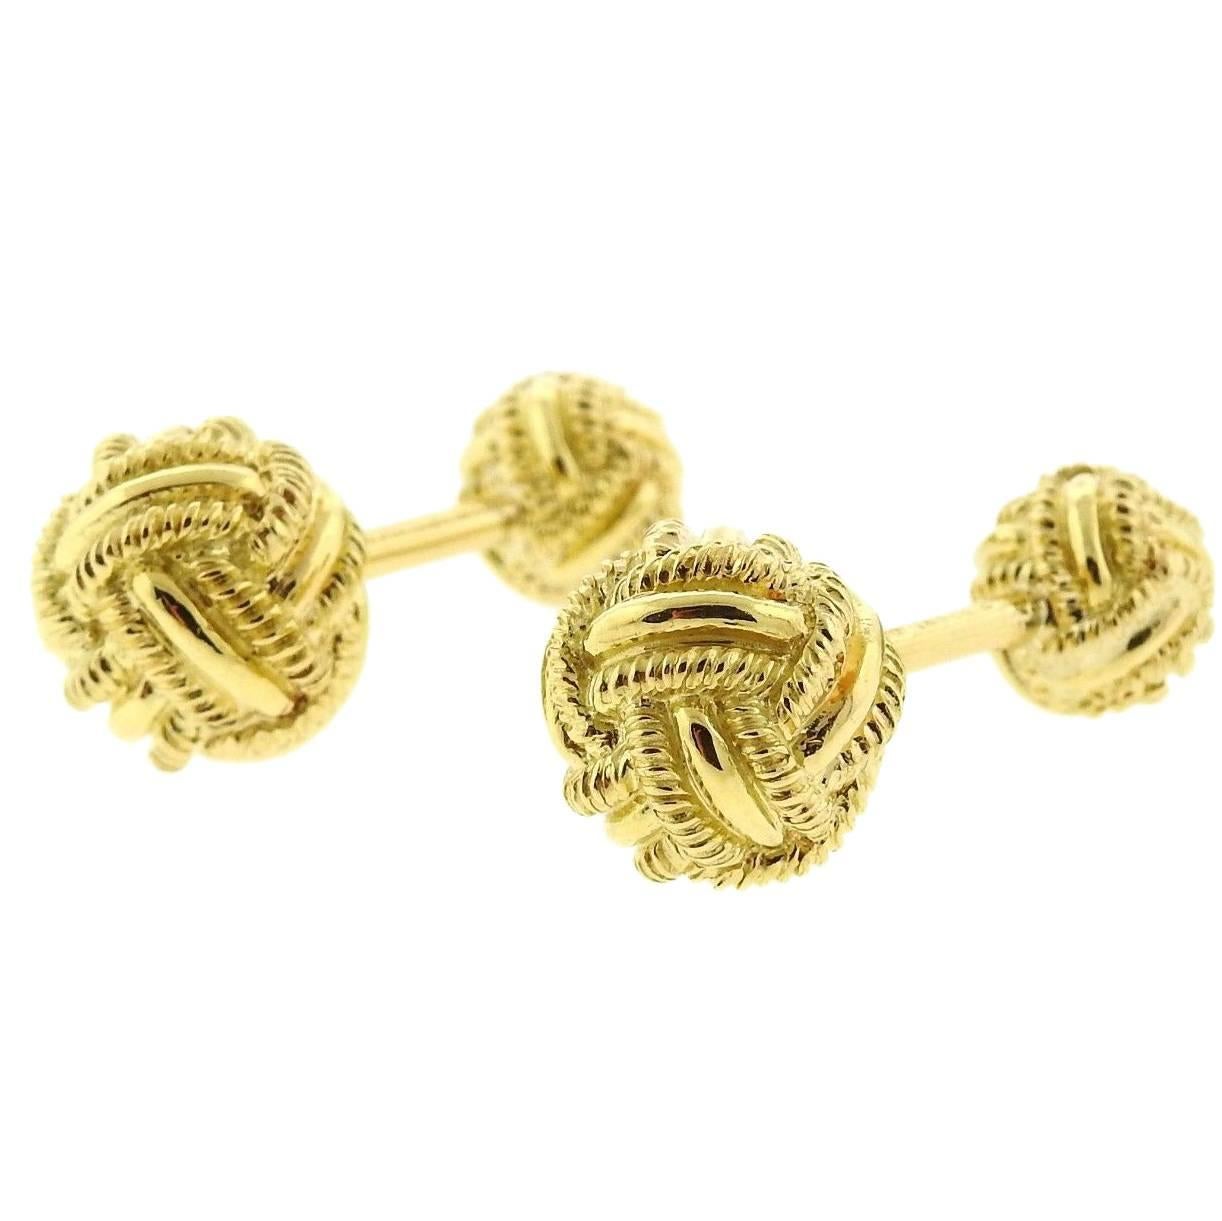 Tiffany & Co Gold Rope Knot Cufflinks